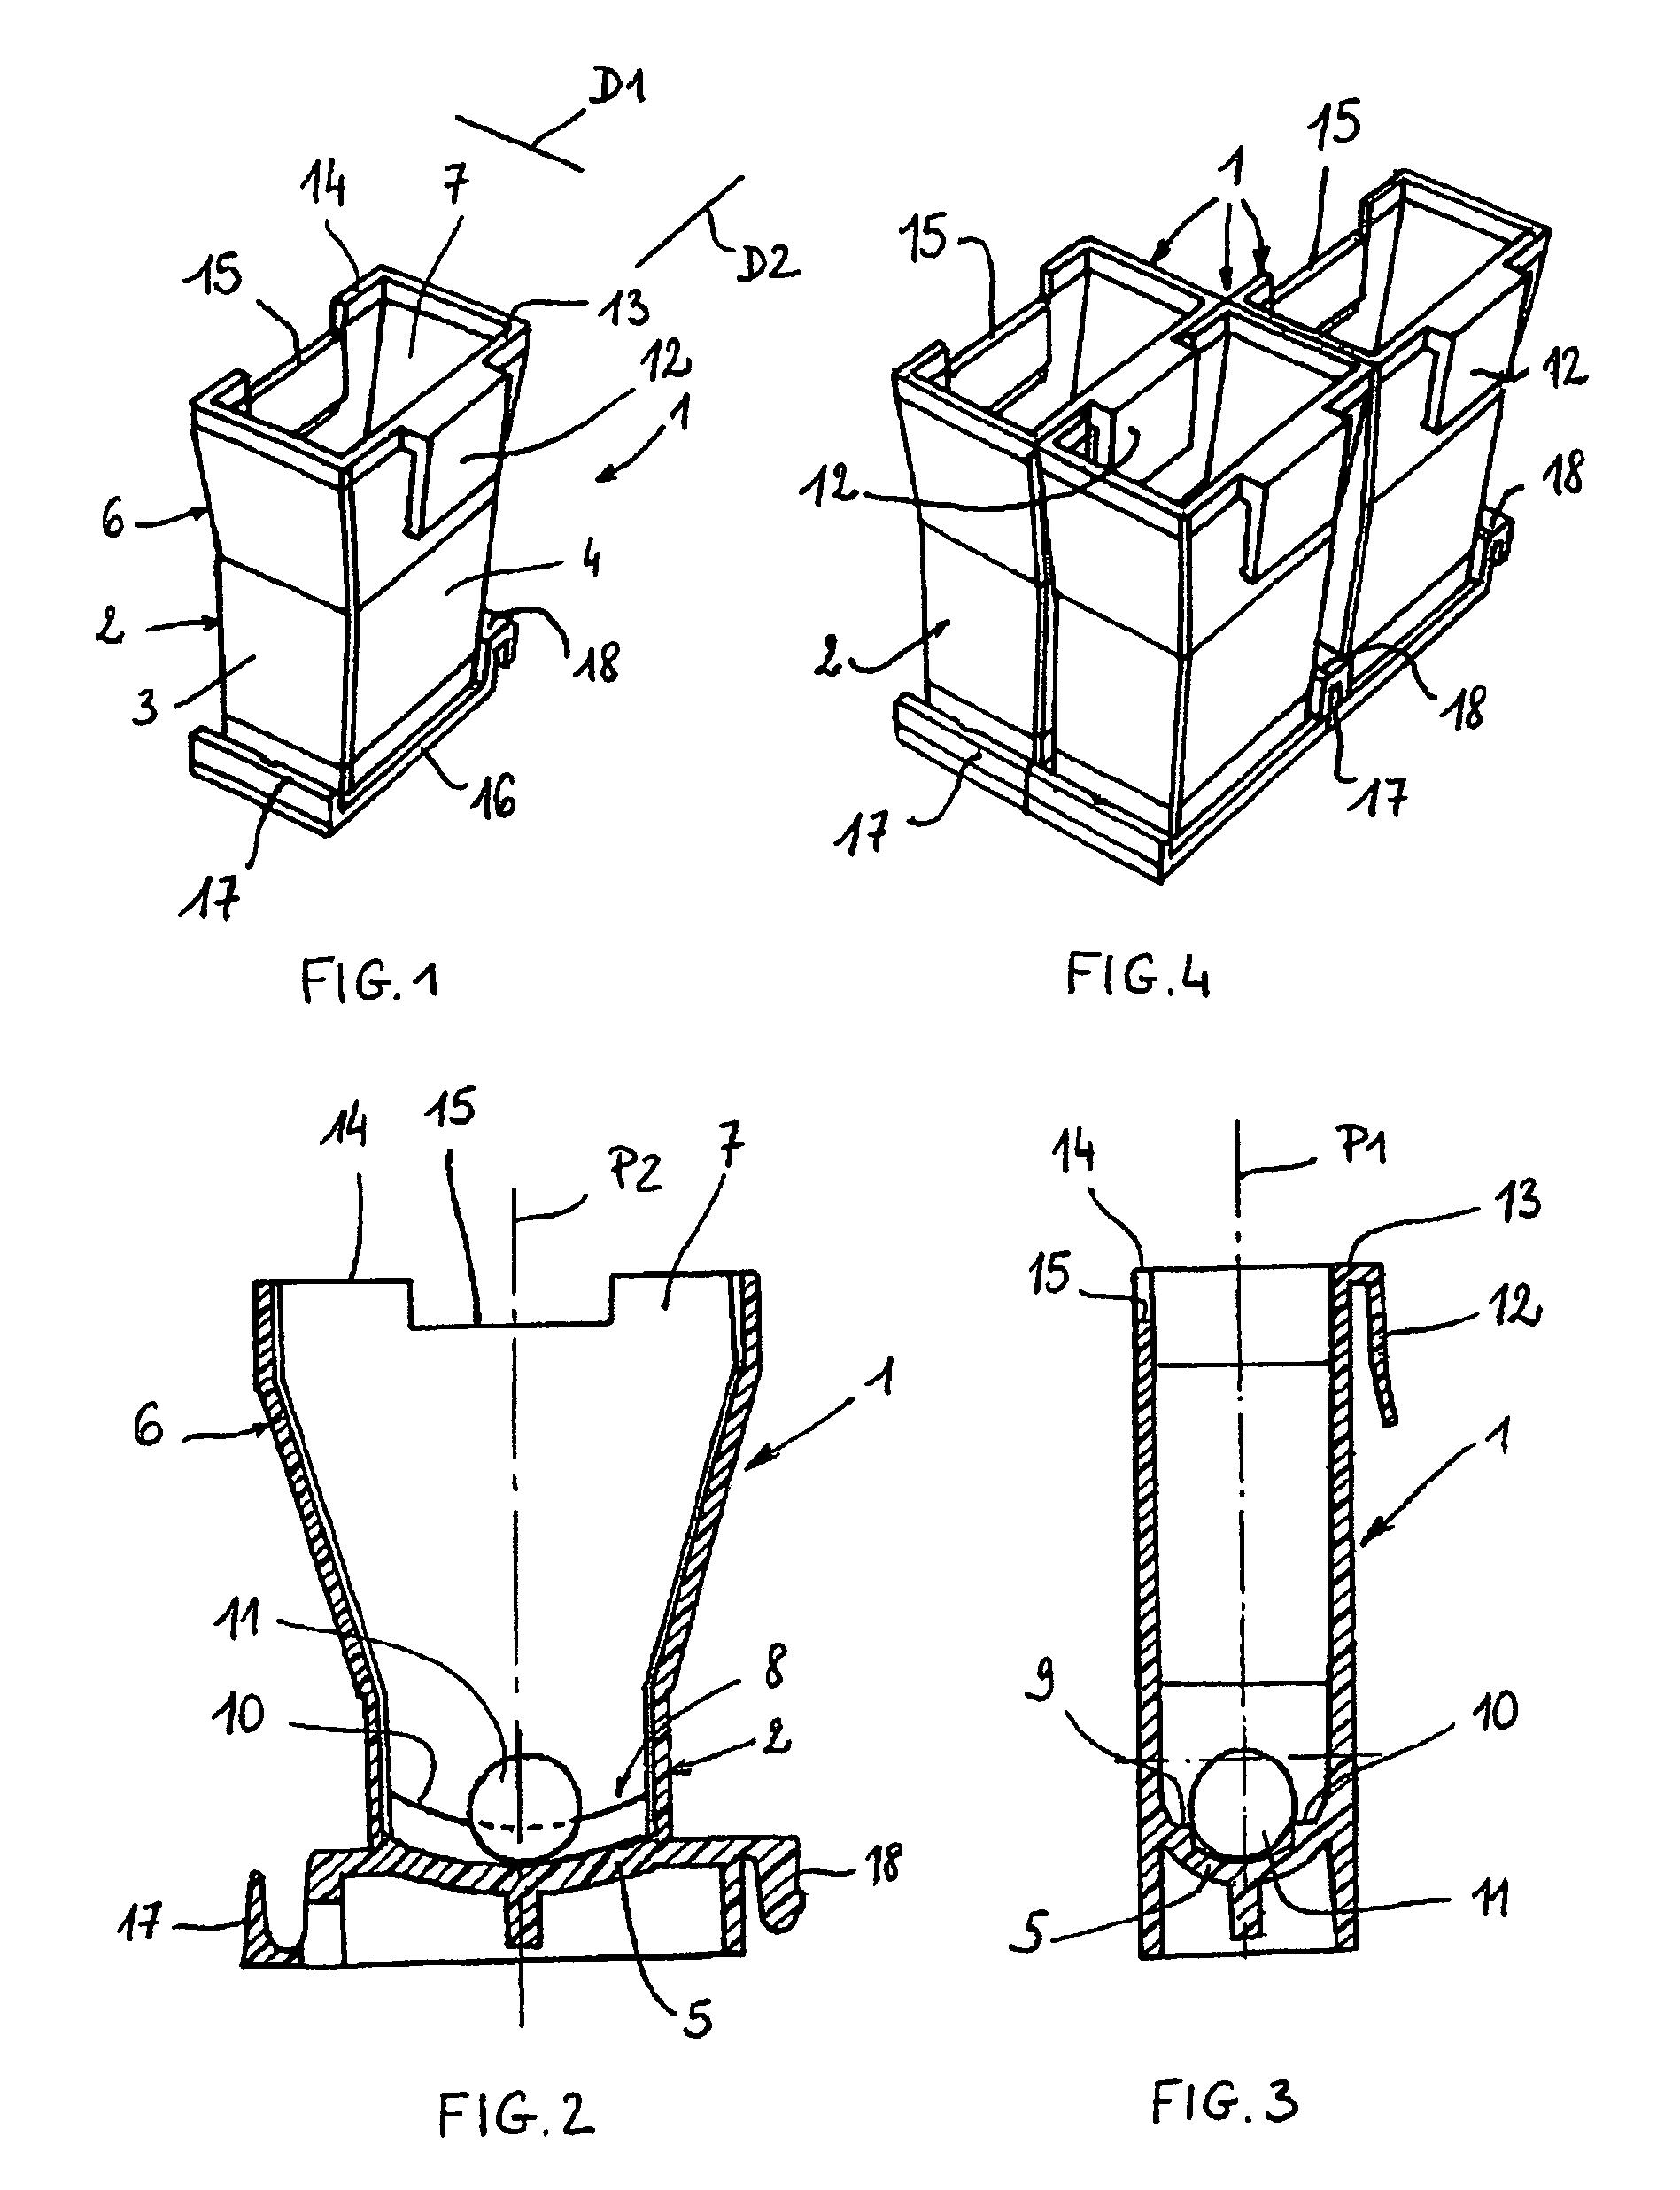 Unit cuvette for analyzing a biological fluid, automatic device for in vitro analysis